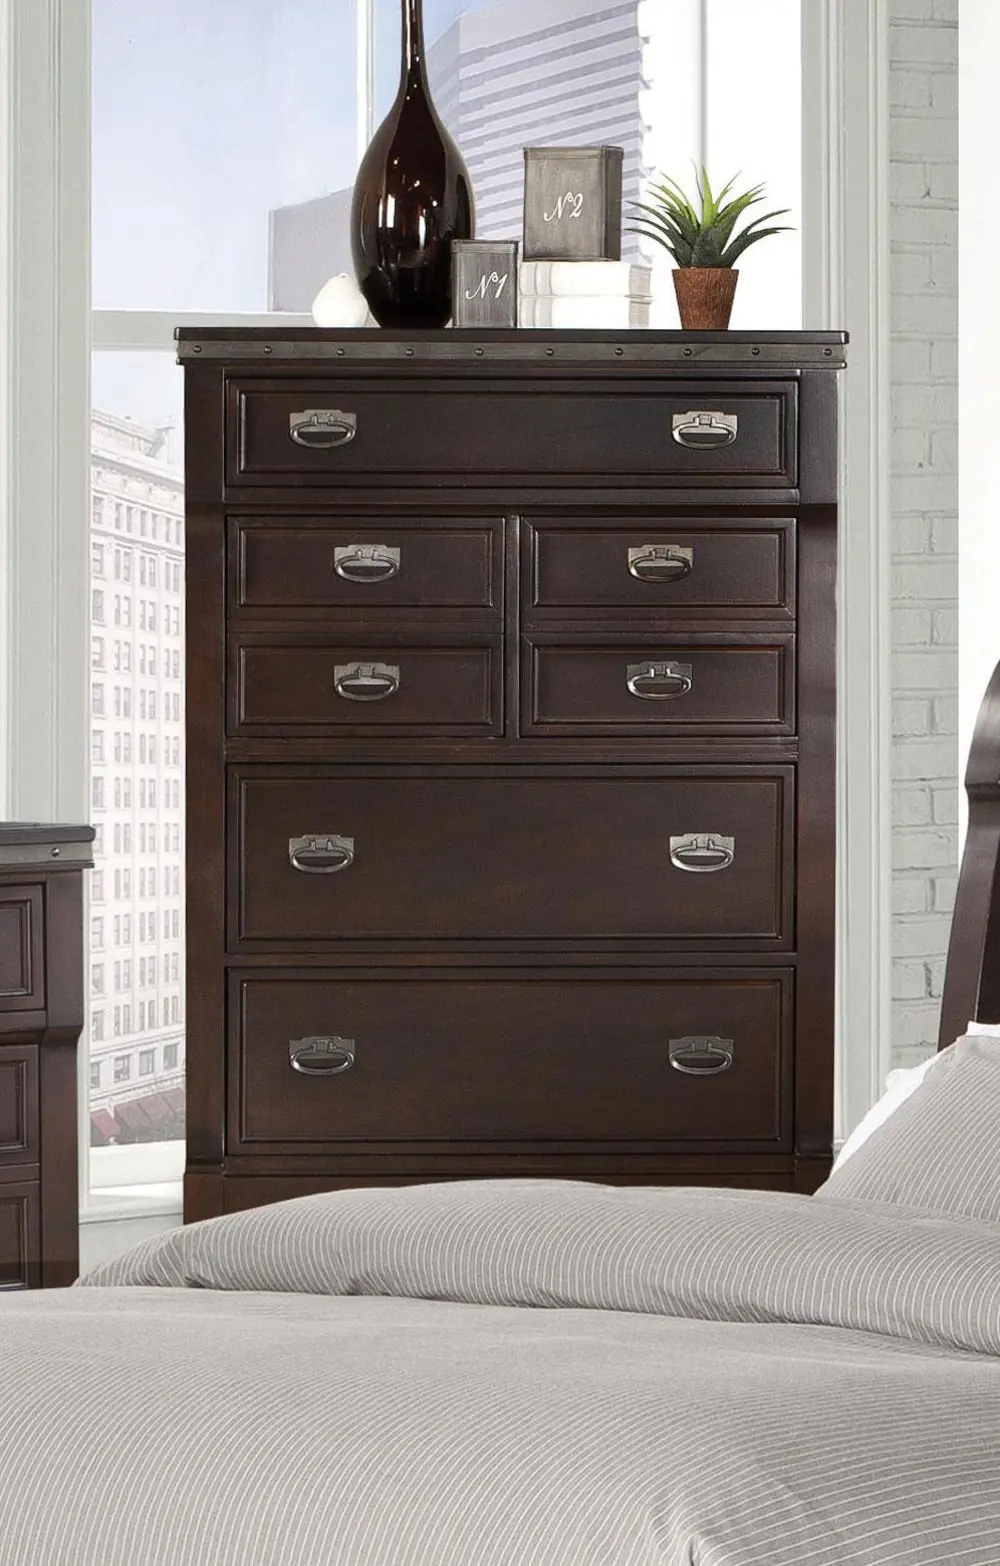 776/777-05/CHEST Morgan Wineberry Brown Chest of Drawers-1